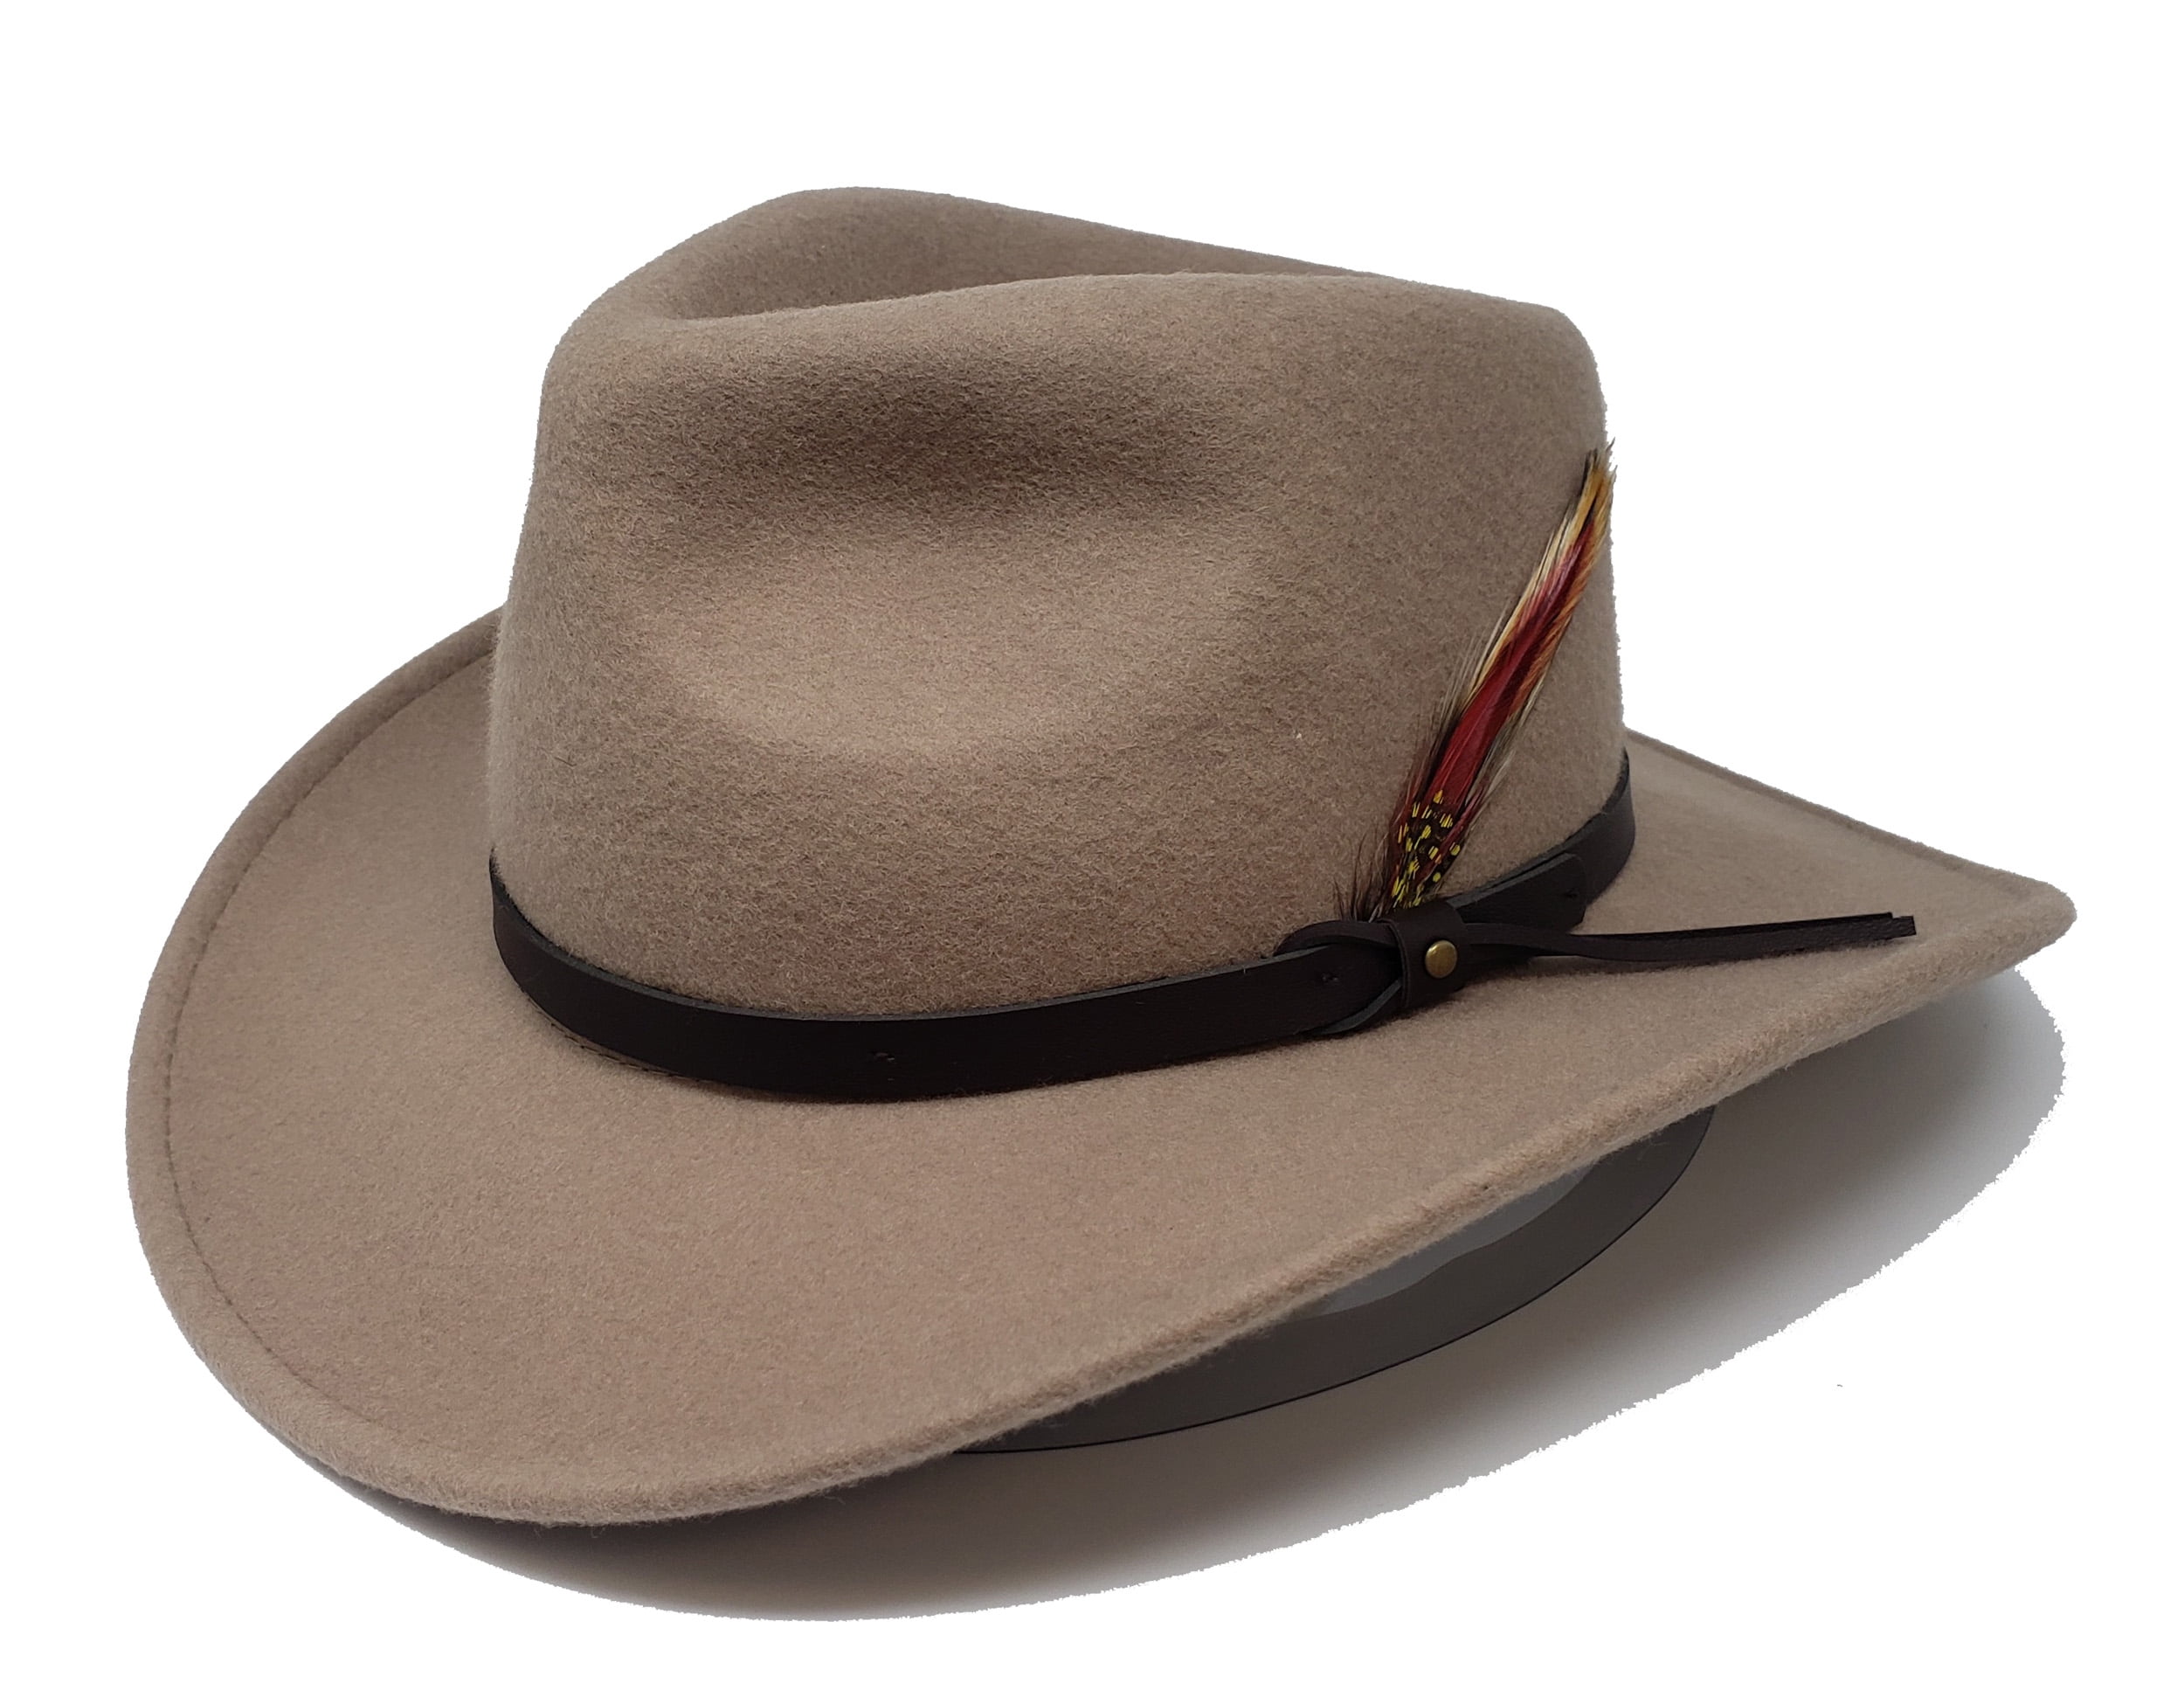 Mens Brown Felt Crushable Western Cowboy Rodeo hat  wire brim hat S to XL new